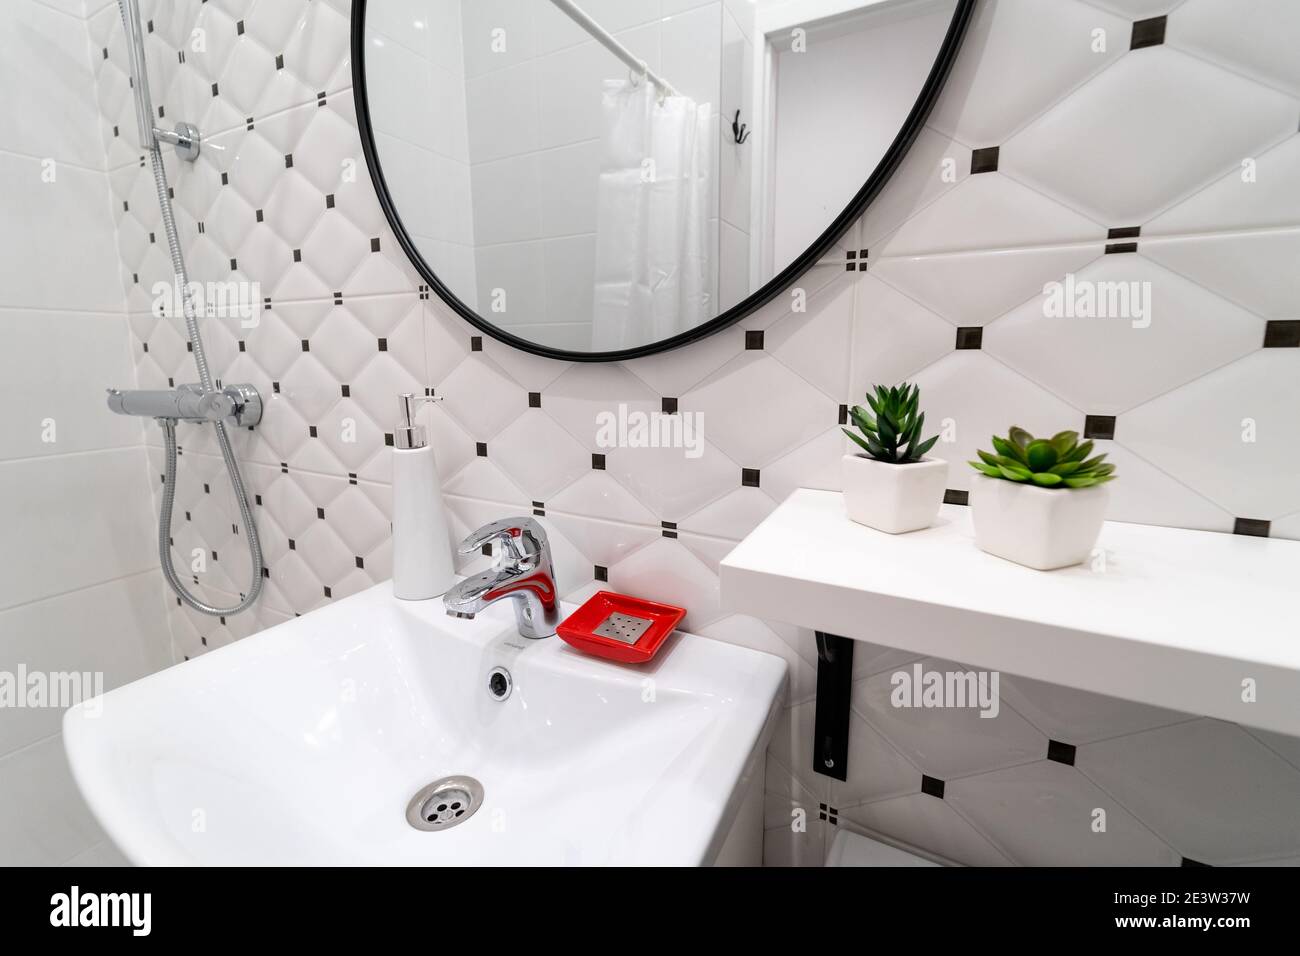 Modern white and black toilet interior. White sink with water tap and toiletries, above it large round mirror on the wall of the ceramic tiles Stock Photo